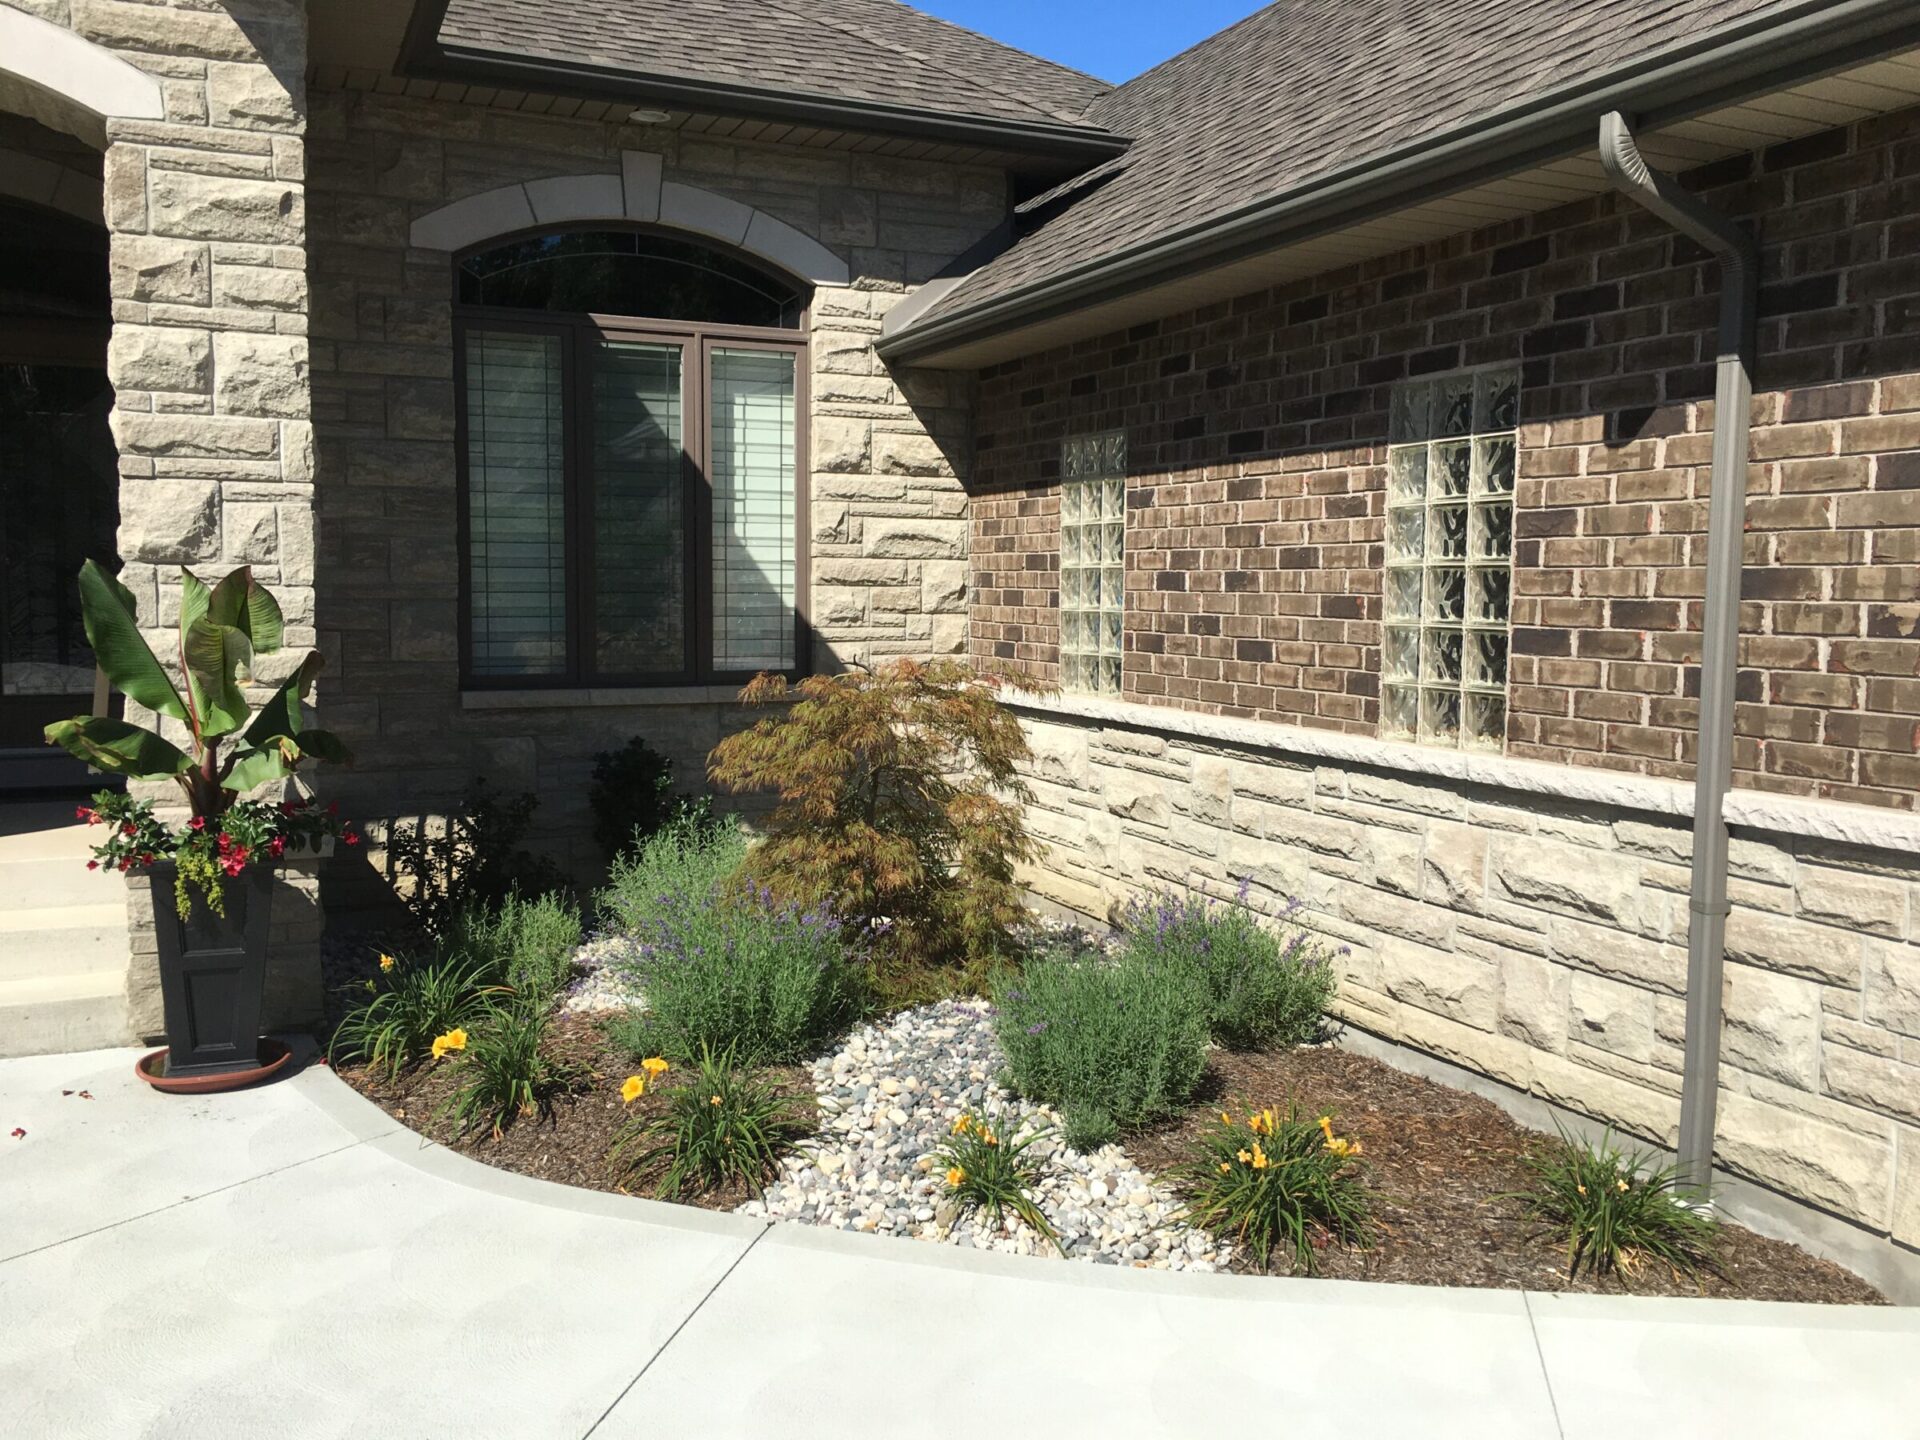 This image shows a well-maintained front yard with a stone exterior house, landscaped with shrubs, flowering plants, and a decorative potted plant.